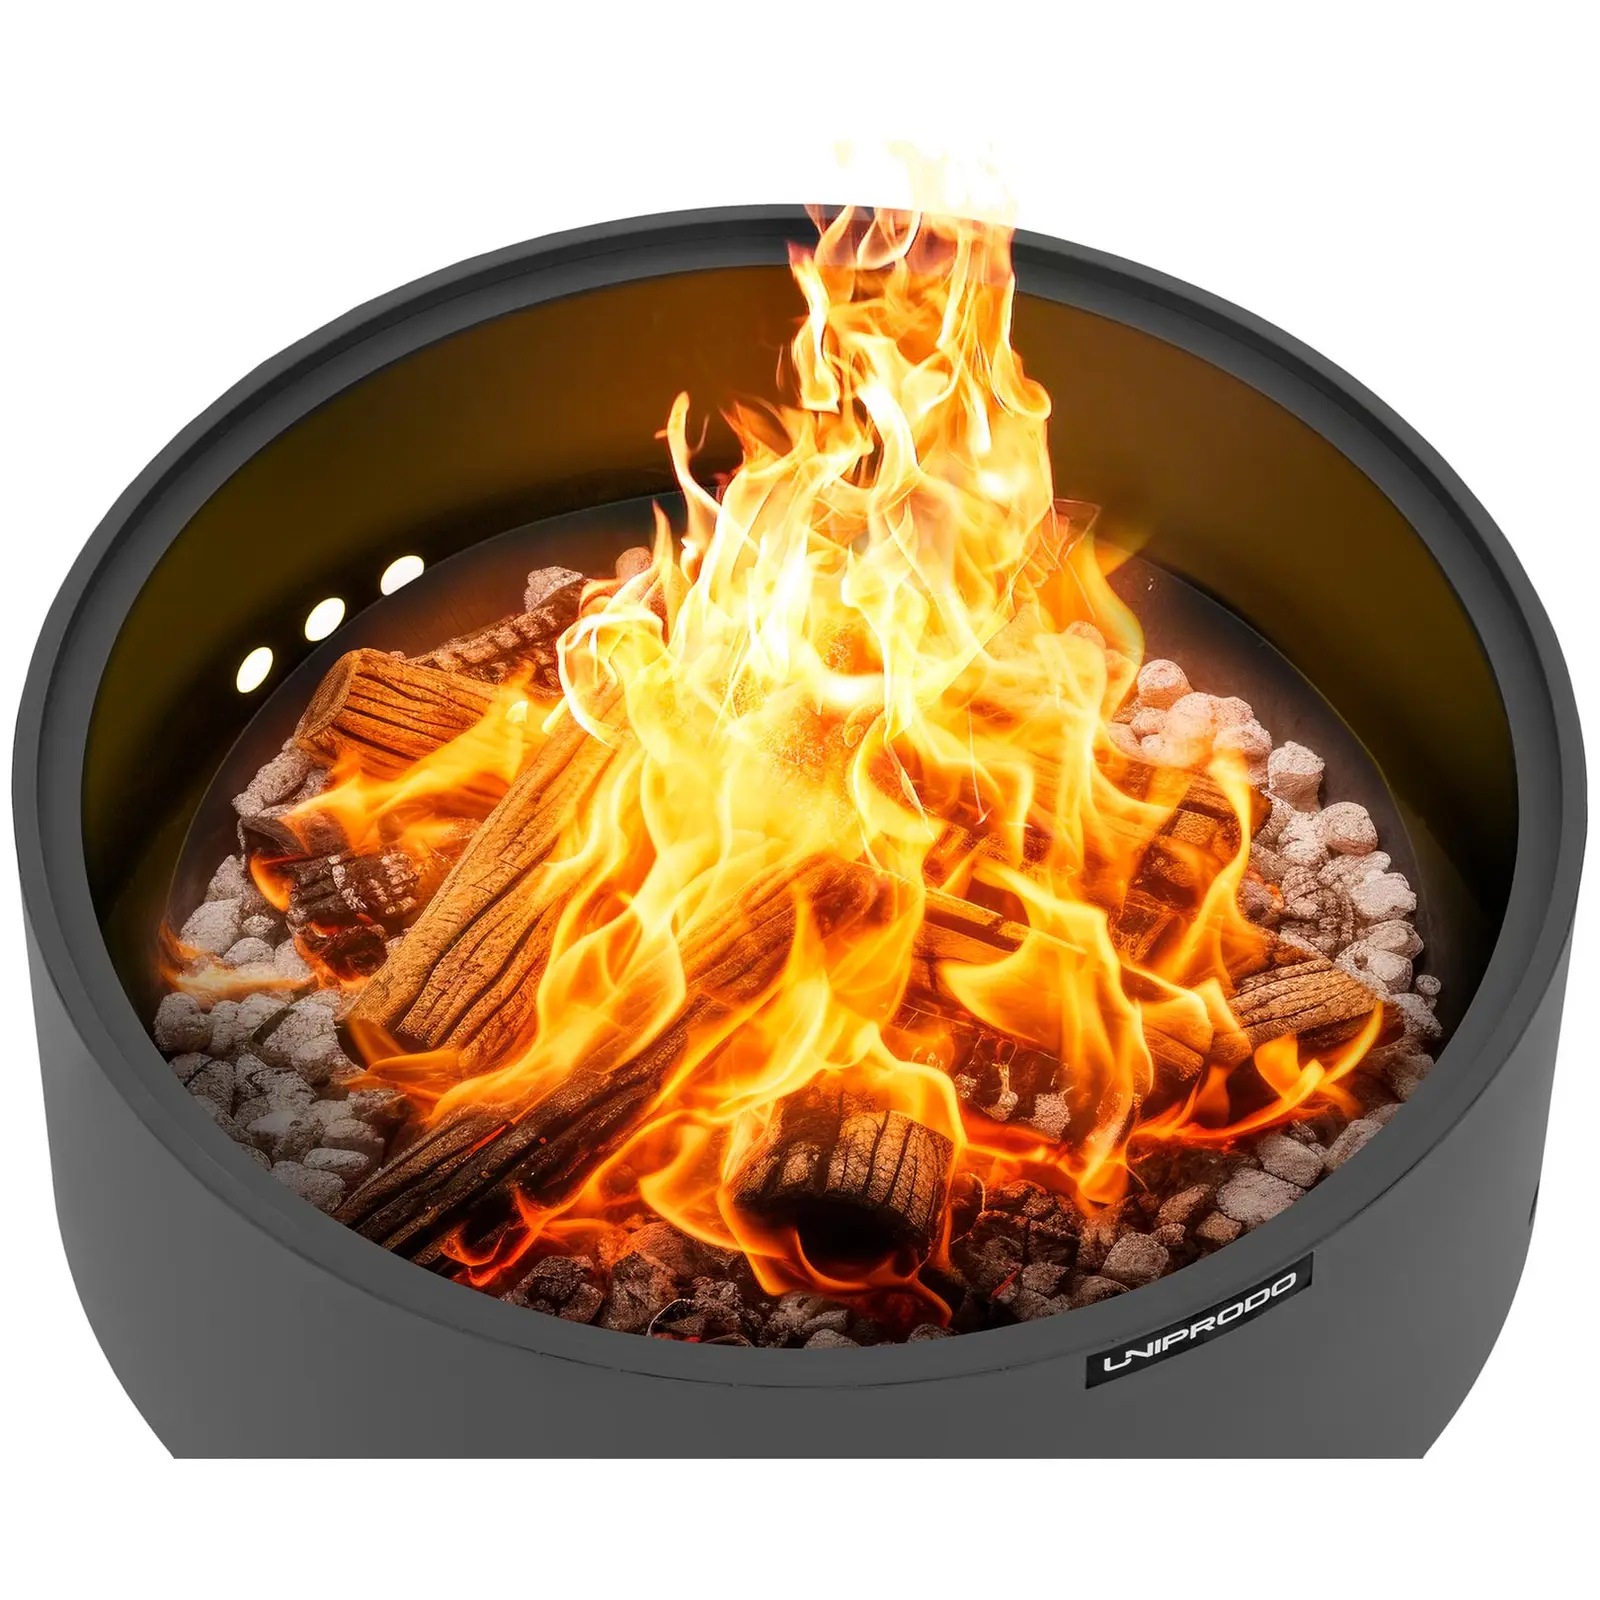 Fire bowl - with 2 grill grates -60 x60 x36 cm